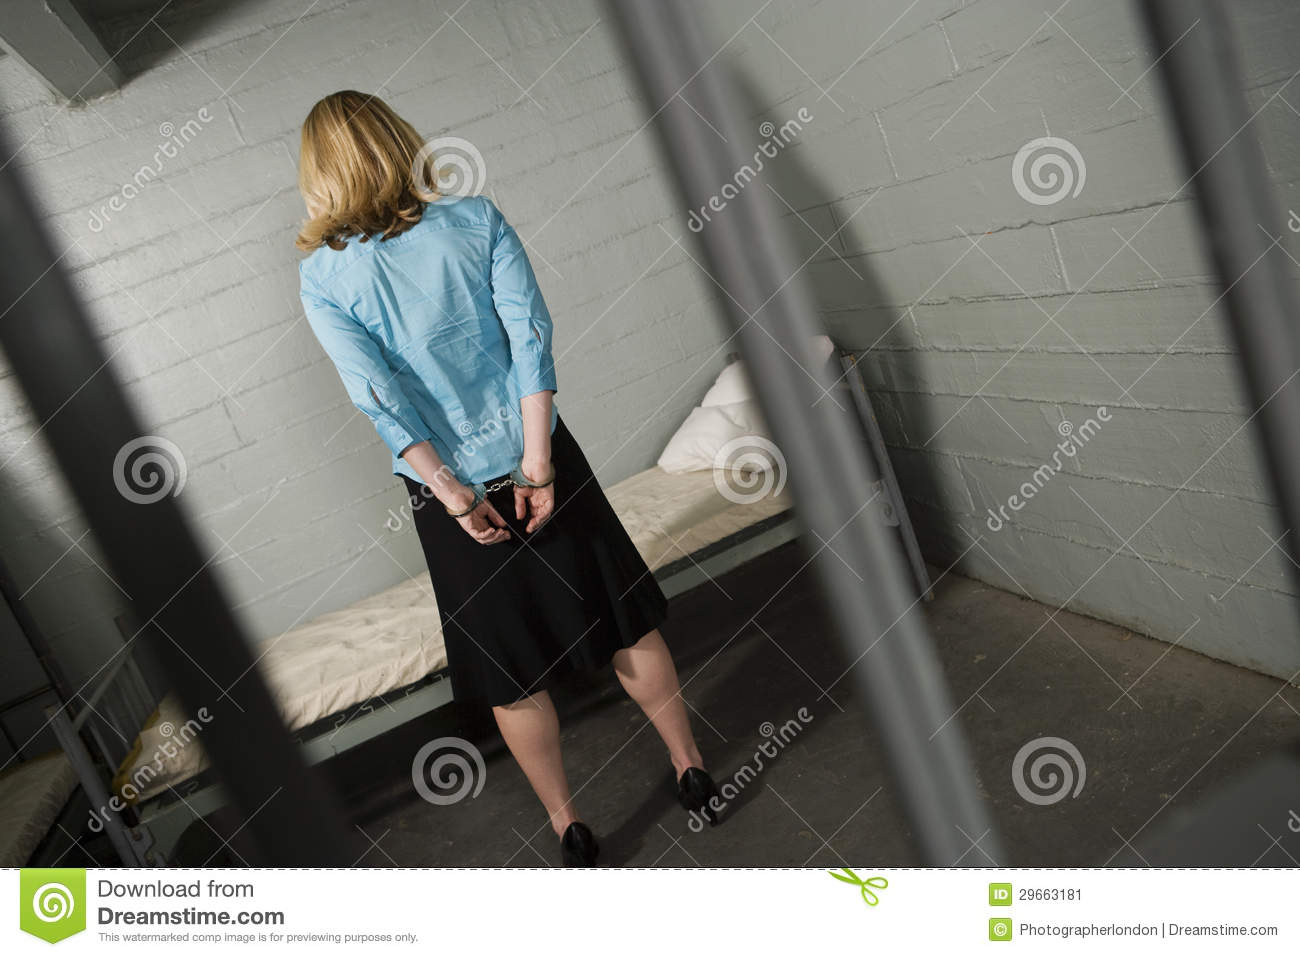 Handcuffed Criminal Behind Bars In Jail Stock Image   Image  29663181